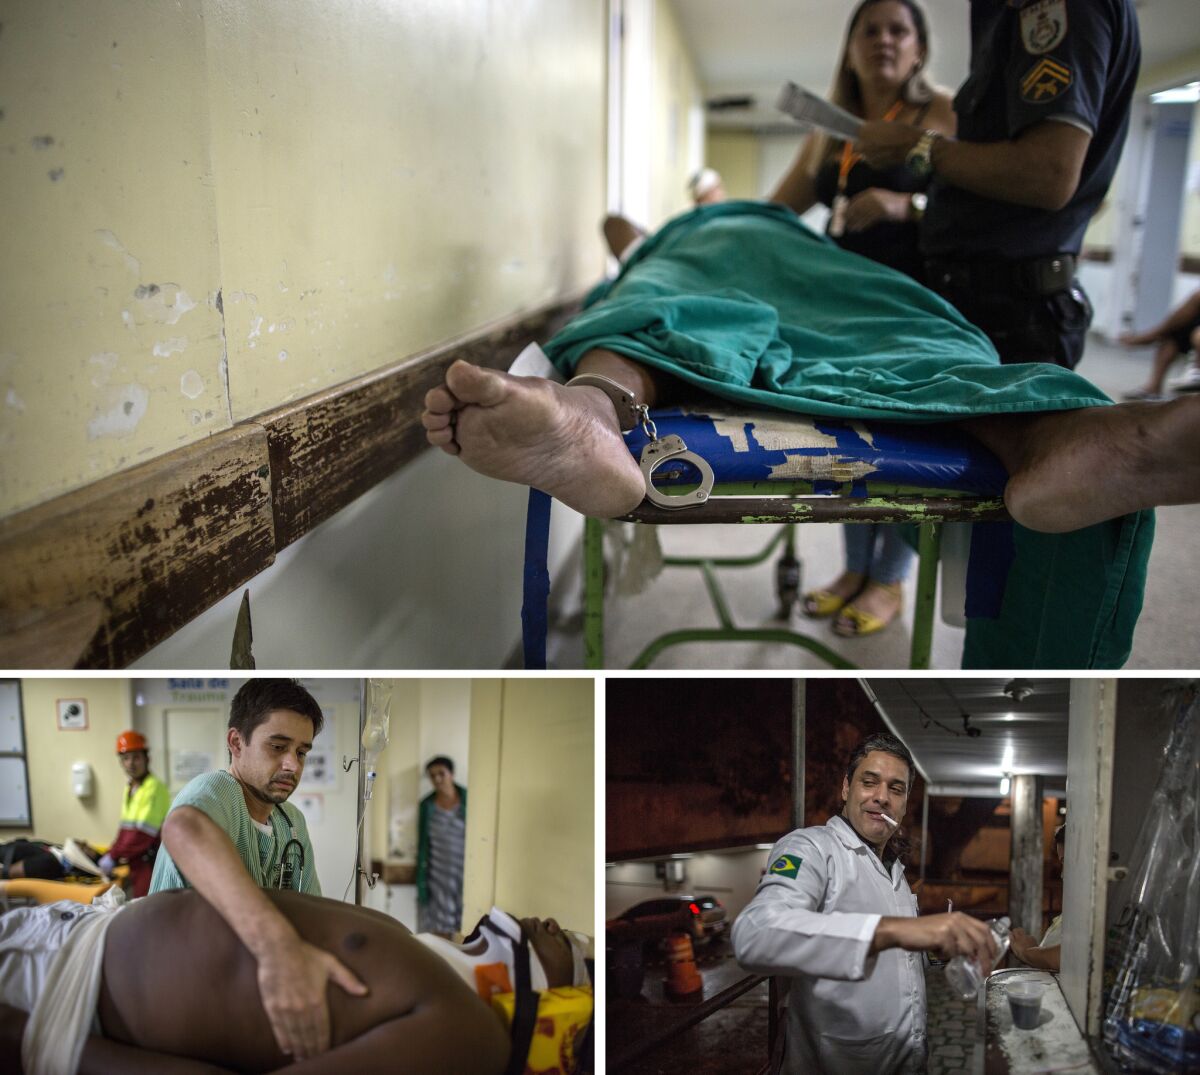 Clockwise from top, a wounded man who was detained by authorities awaits treatment. Alessandry Lopes Bastos, a vascular surgeon, drinks coffee before surgery. Felipe St. Clair, chief of emergency, tends to a patient.